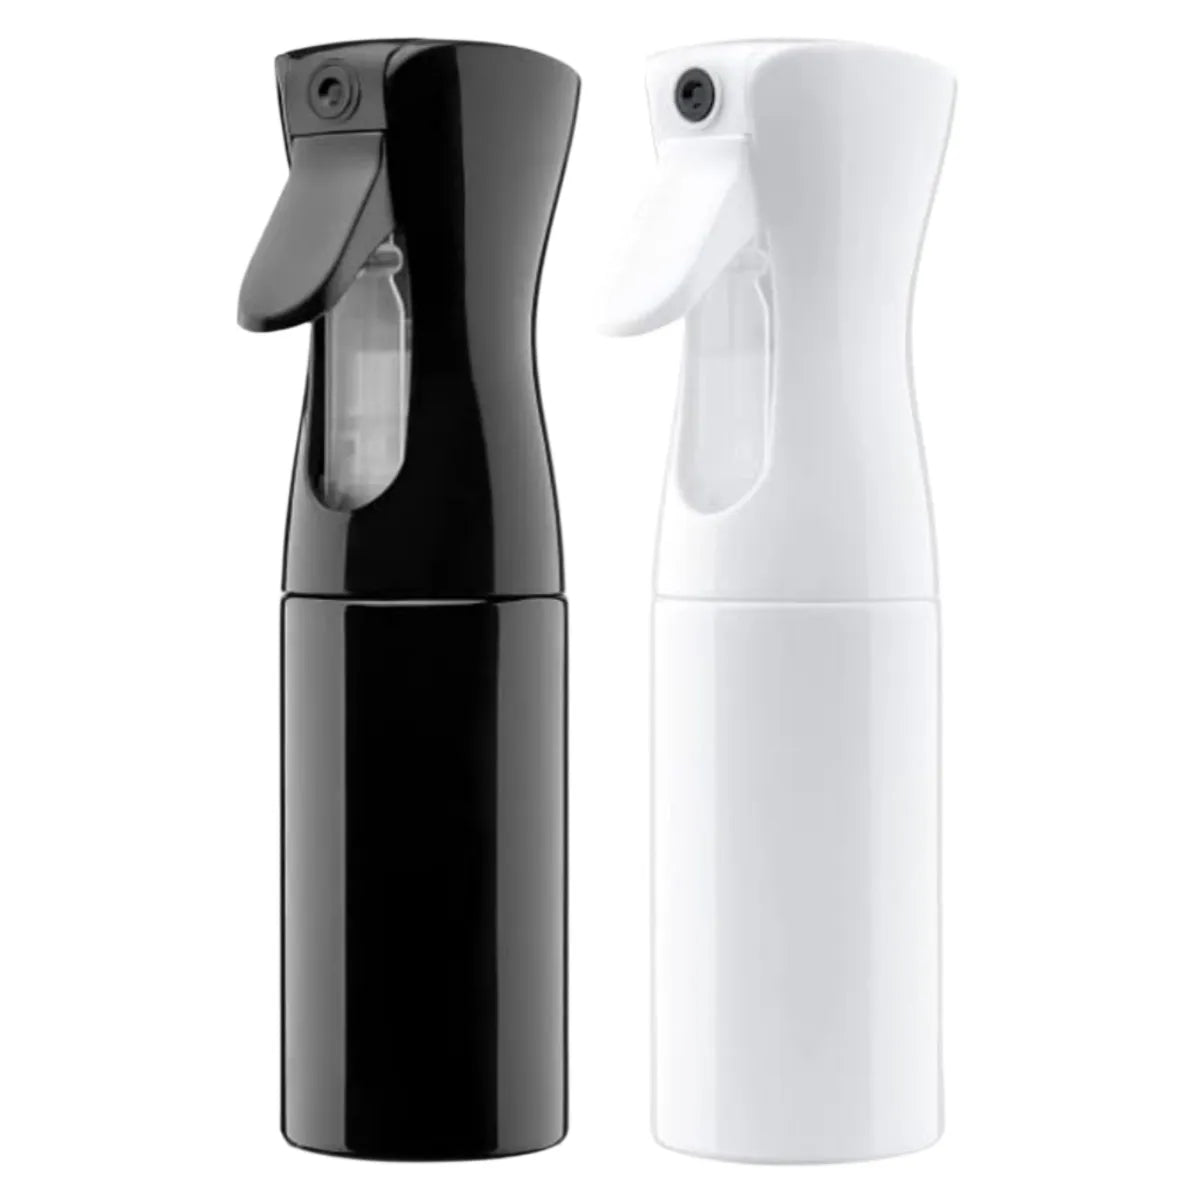 Hair Salon Atomizer: Professional Spray Bottle for Styling, Barber Use